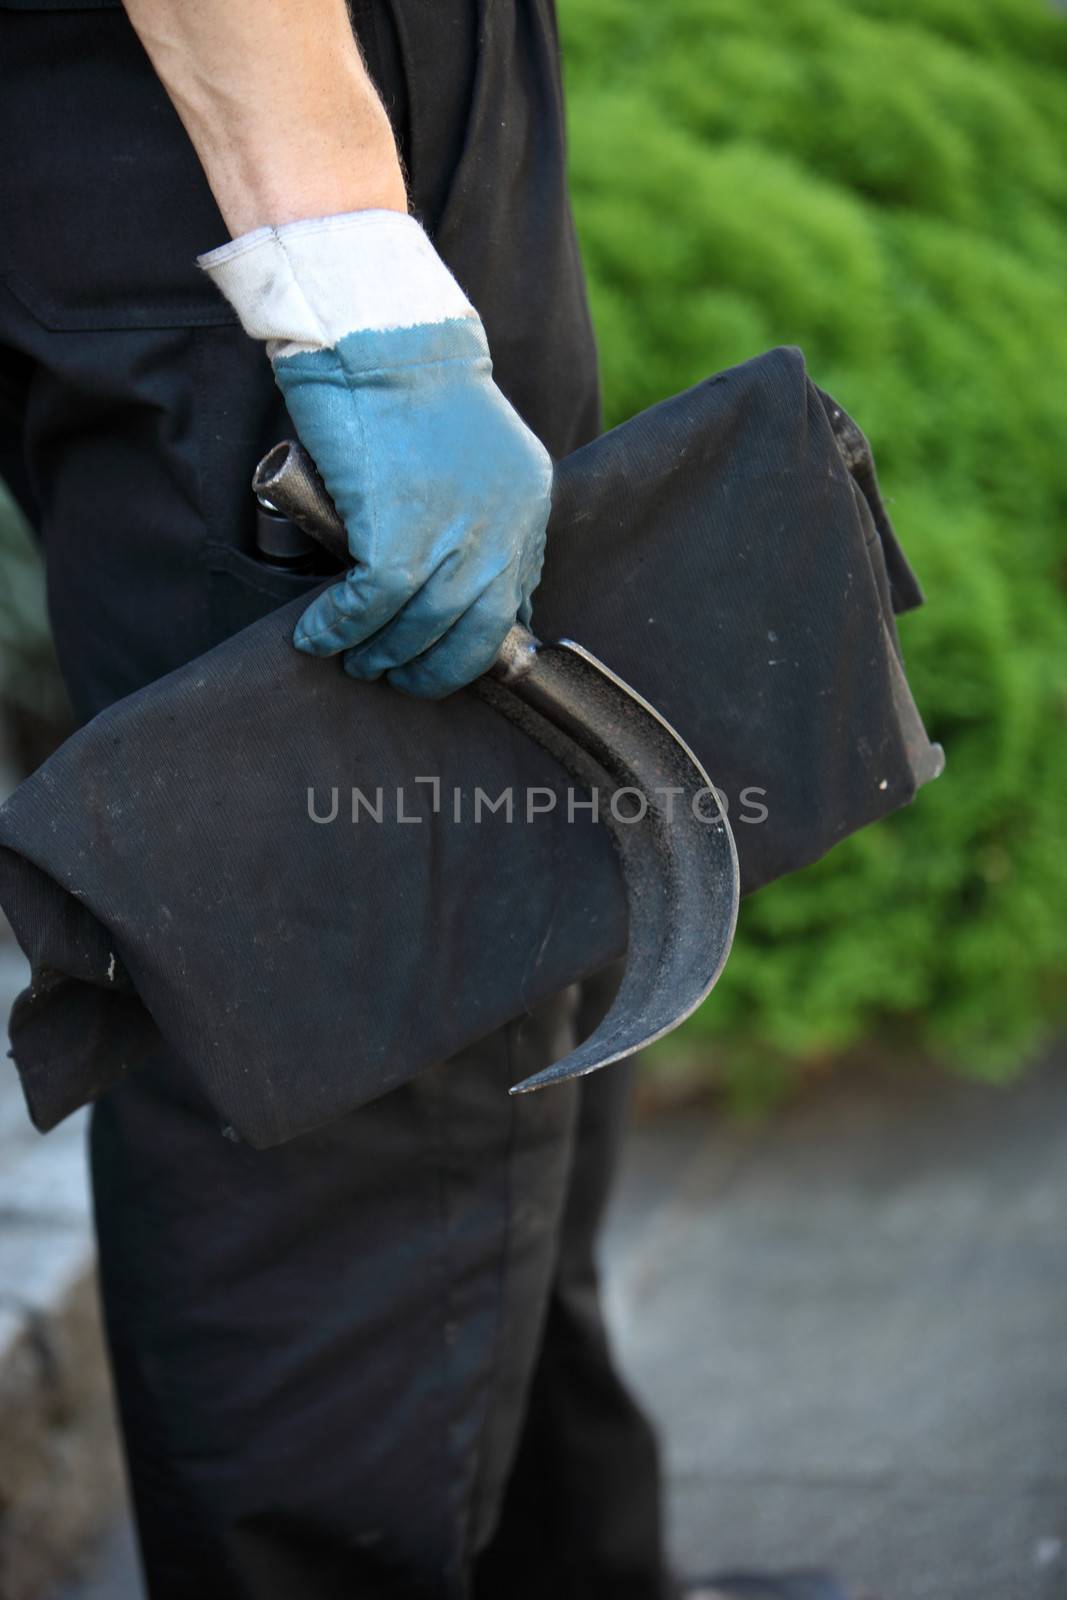 Chimney sweep holding a curved metal scraping tool for dislodging soot and debris from inside a chimney flue